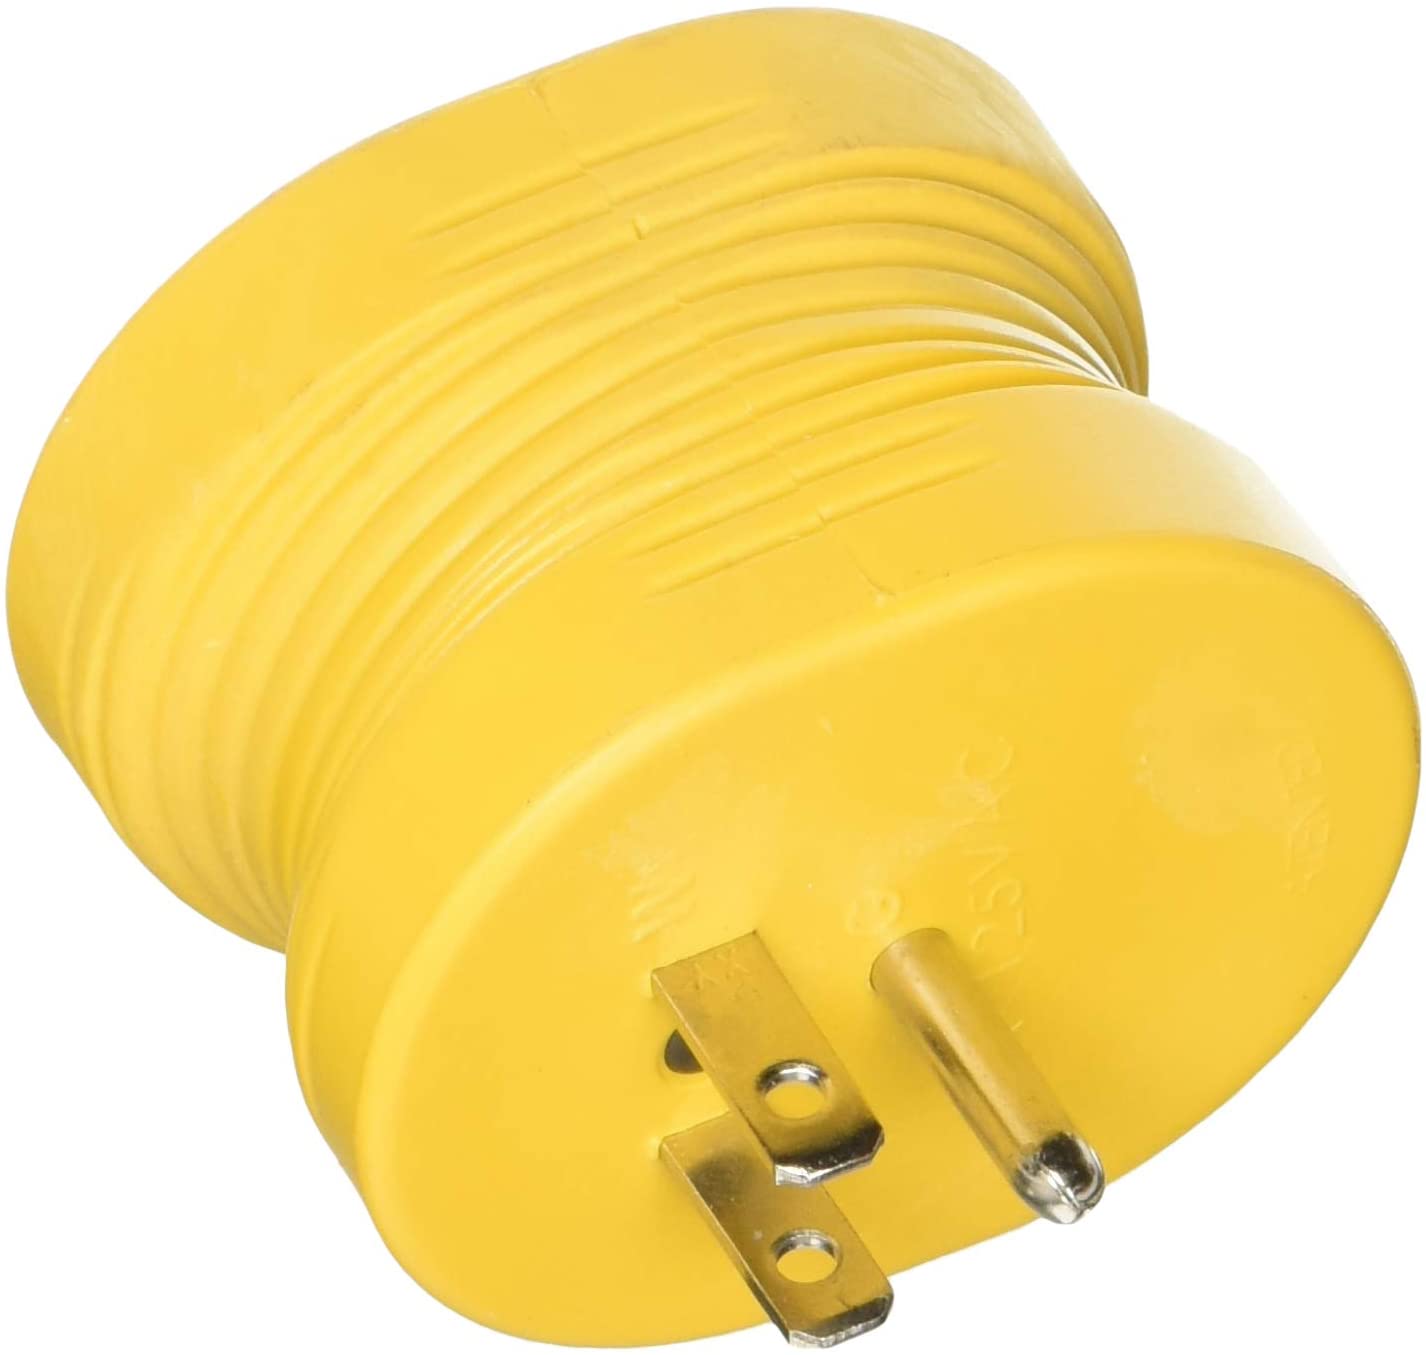 Camco 55222 Power Grip 15M - 30F Adapter